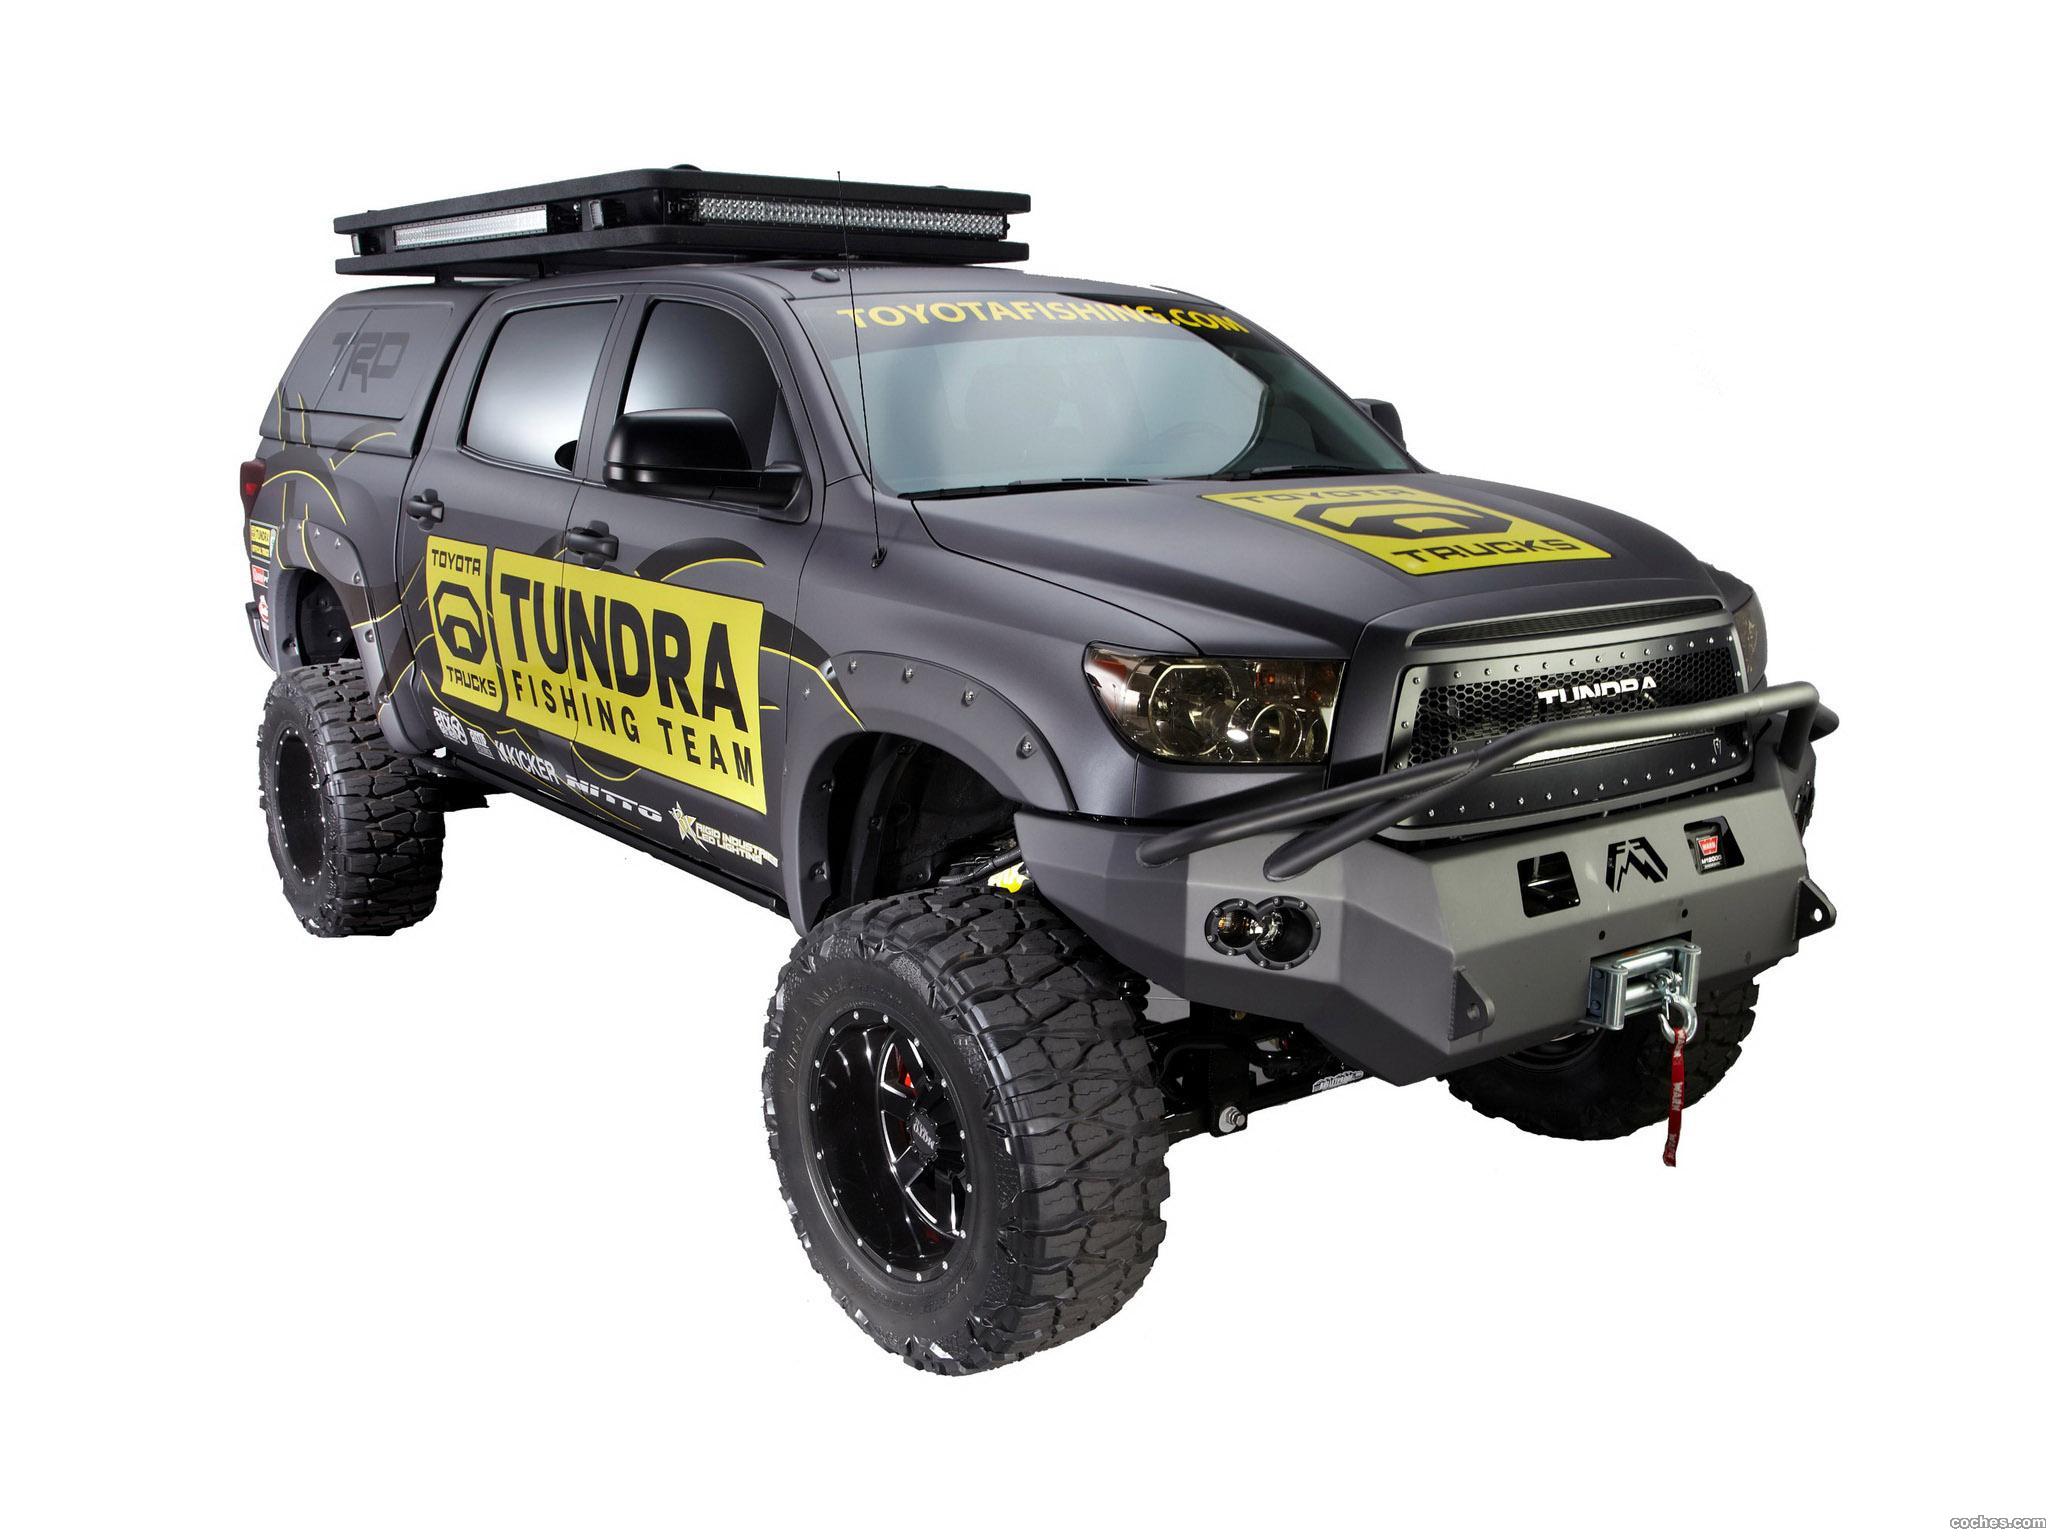 toyota_tundra-ultimate-fishing-by-pro-bass-anglers-2012_r5